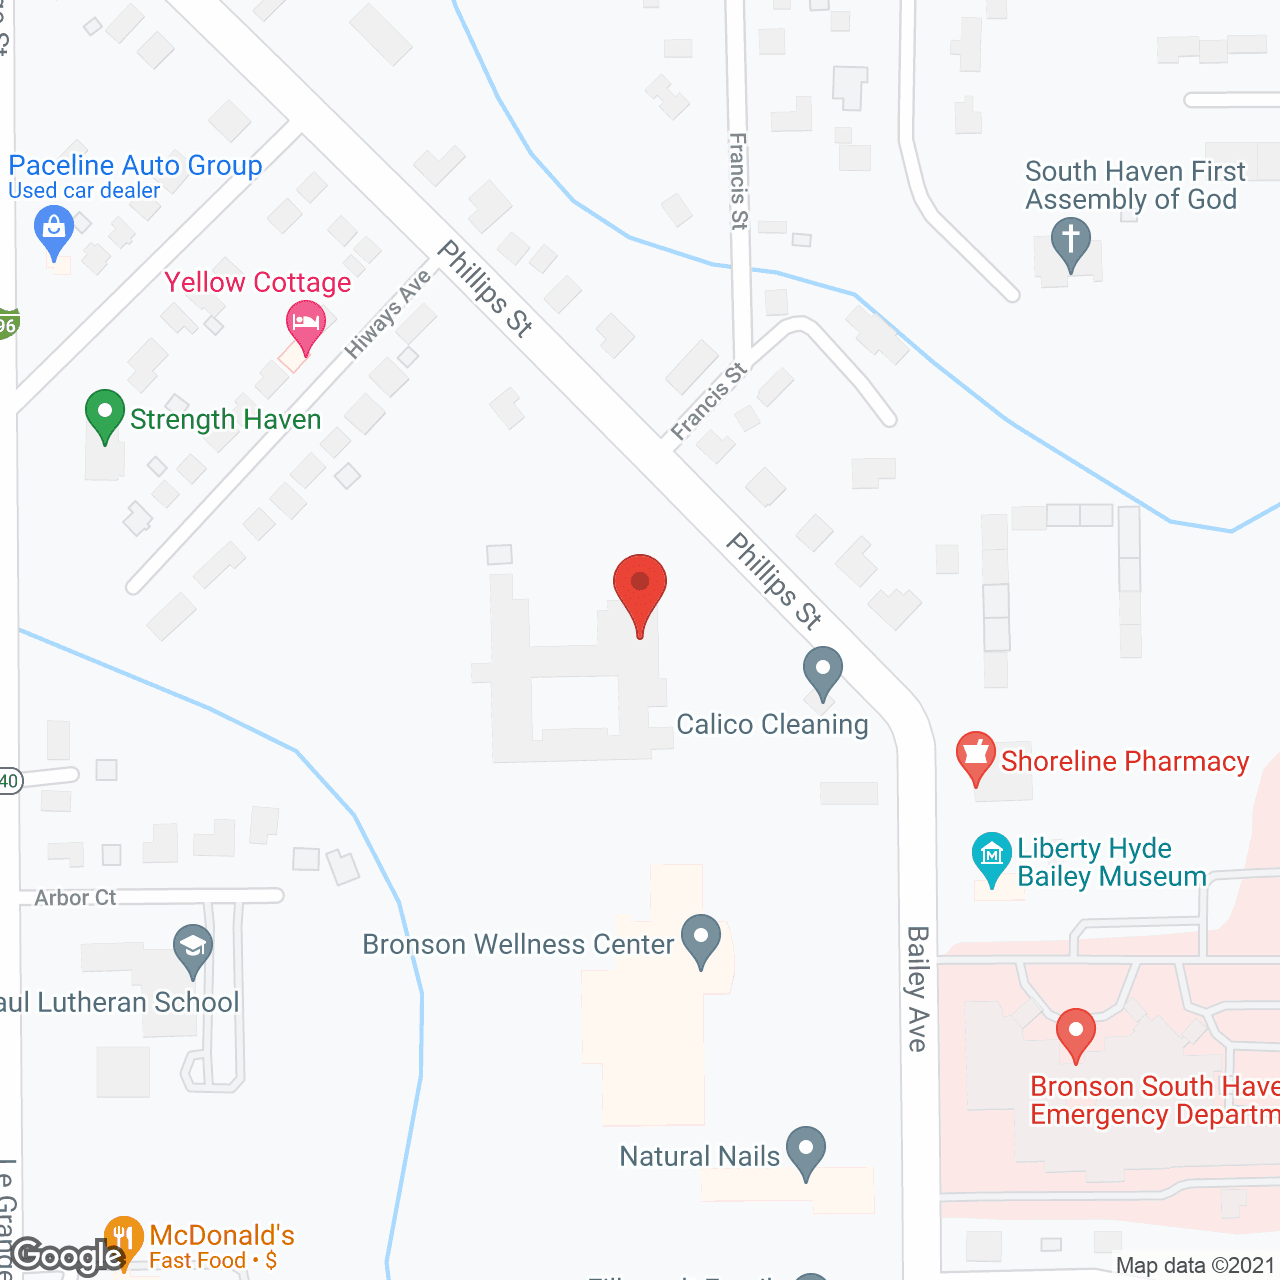 South Haven Healthcare Ctr in google map